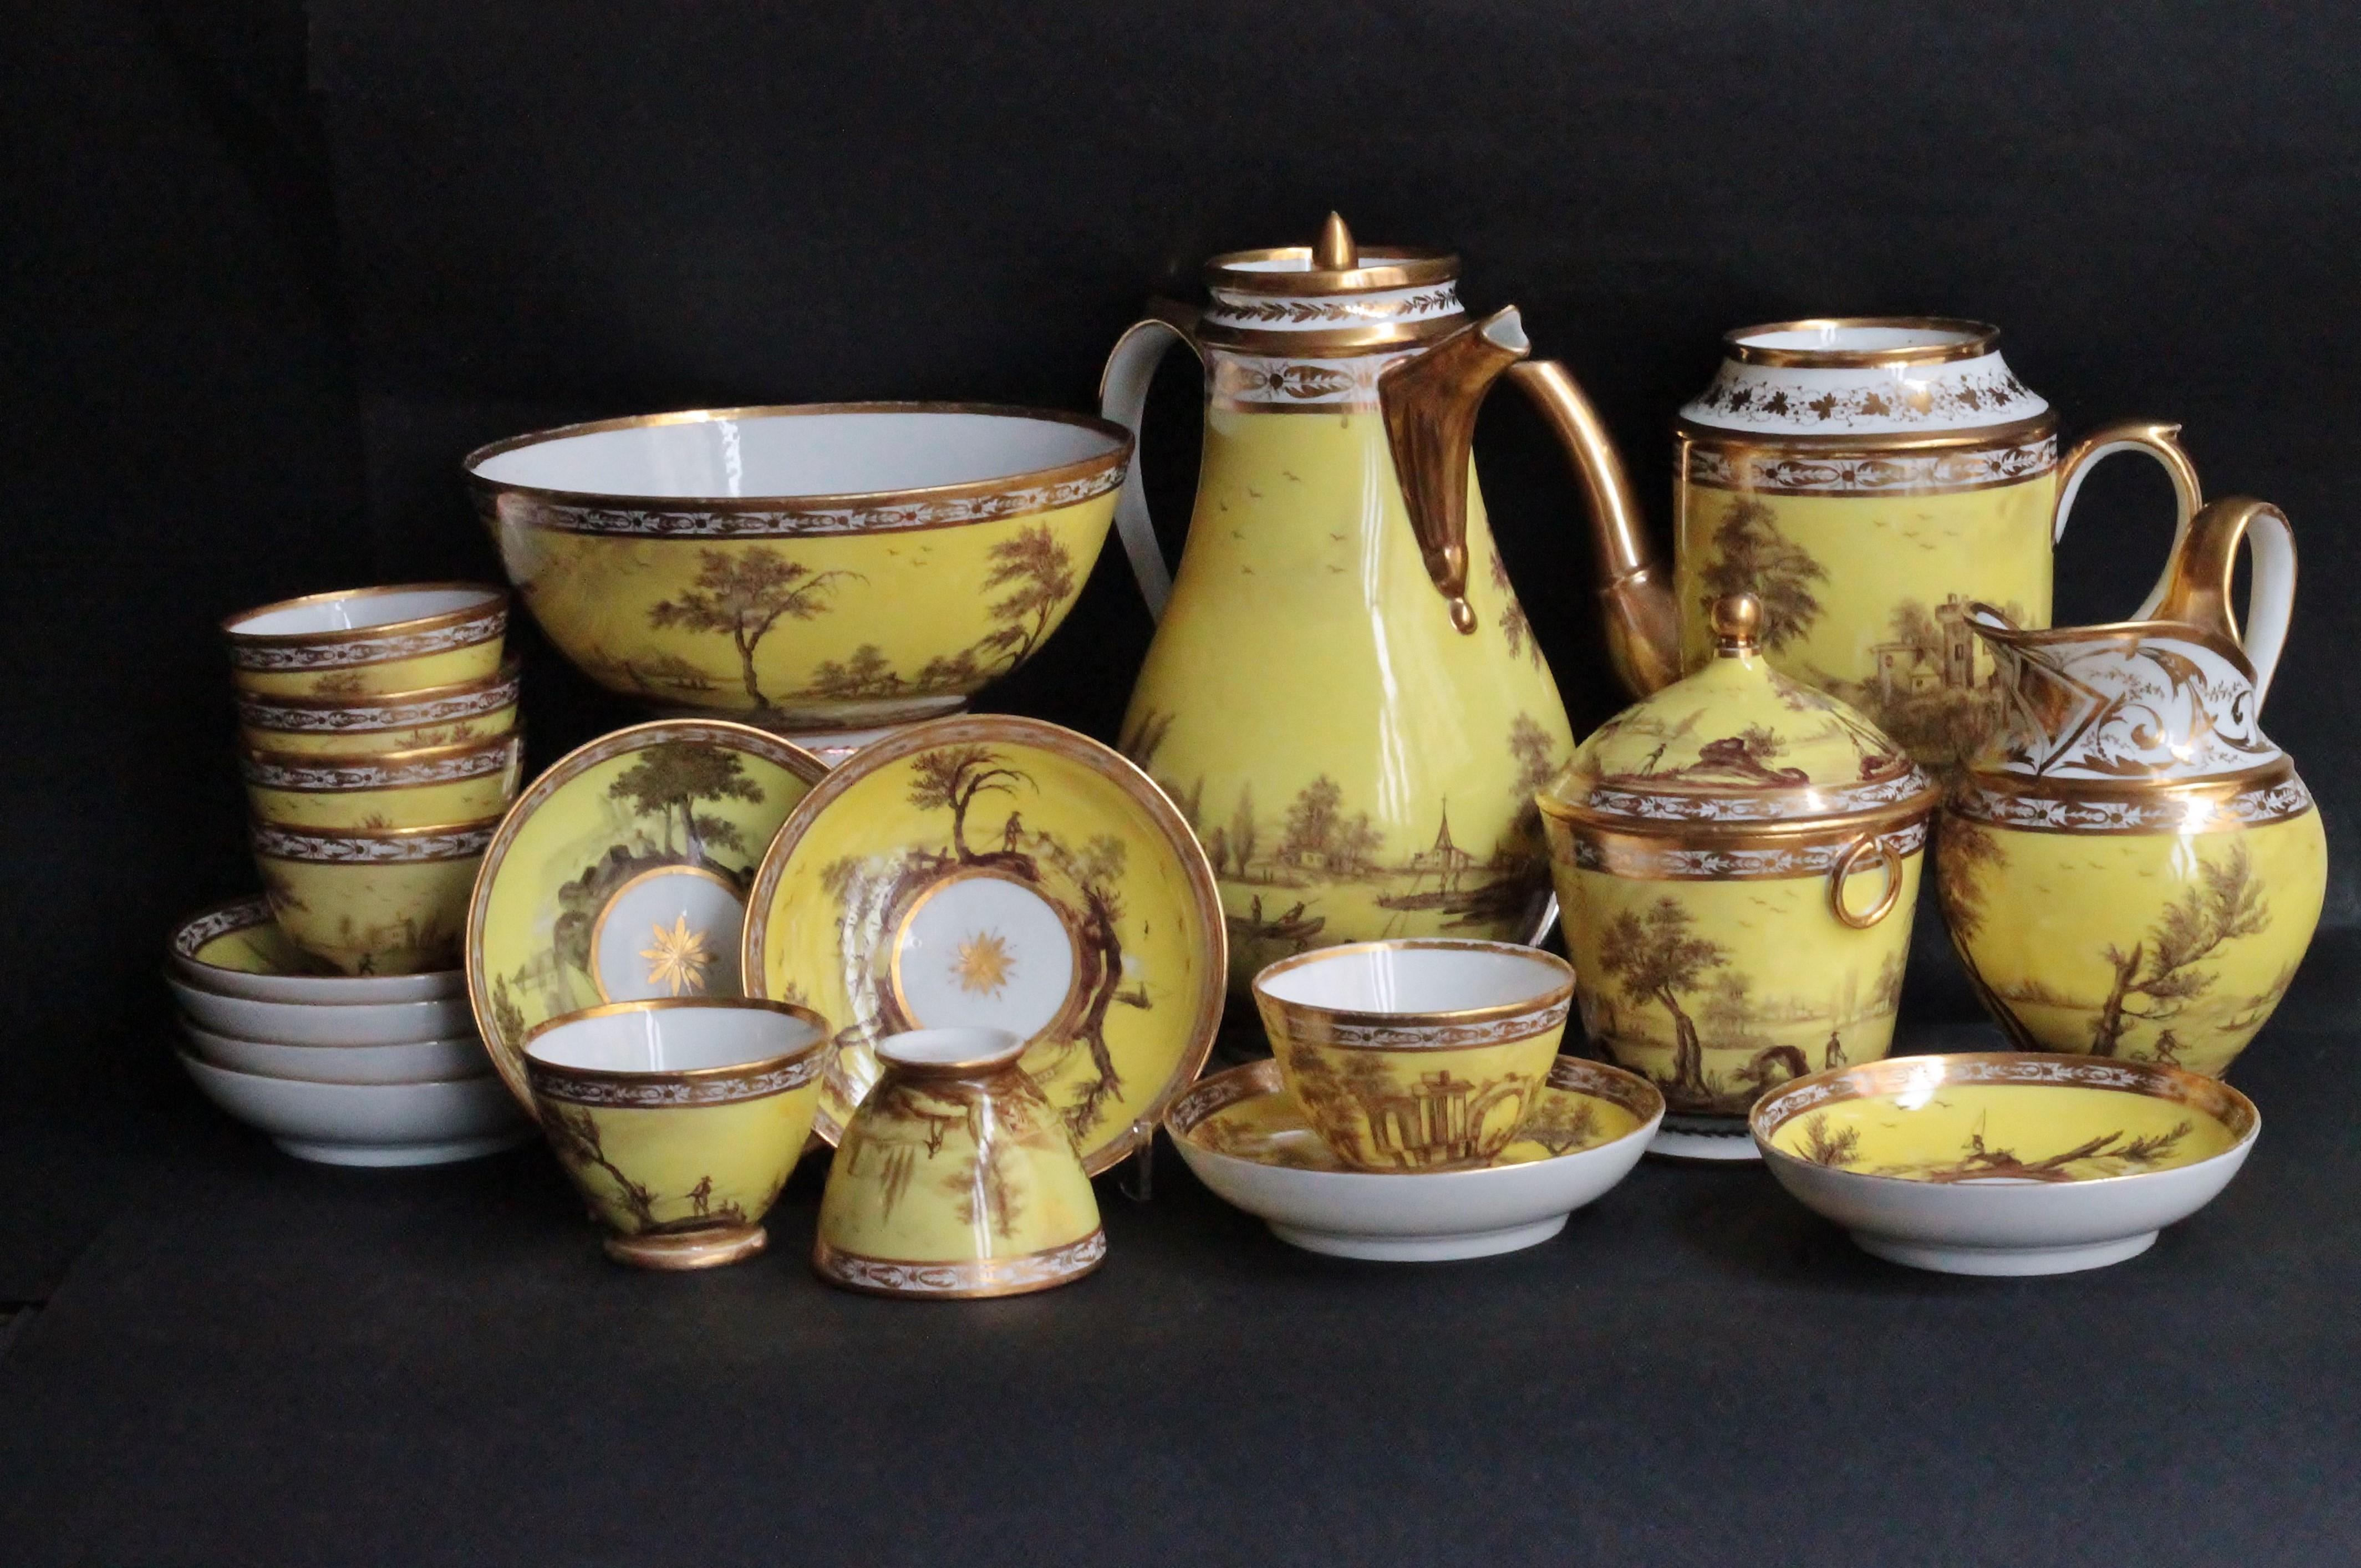 A Paris part tea and coffee service in porcelain painted with livened up landscape in sepia color on yellow background. Gilt rim. It includes:
A baluster coffee-pot and cover
A teapot without cover
A milk-jug
A circular sugar-pot and cover
A